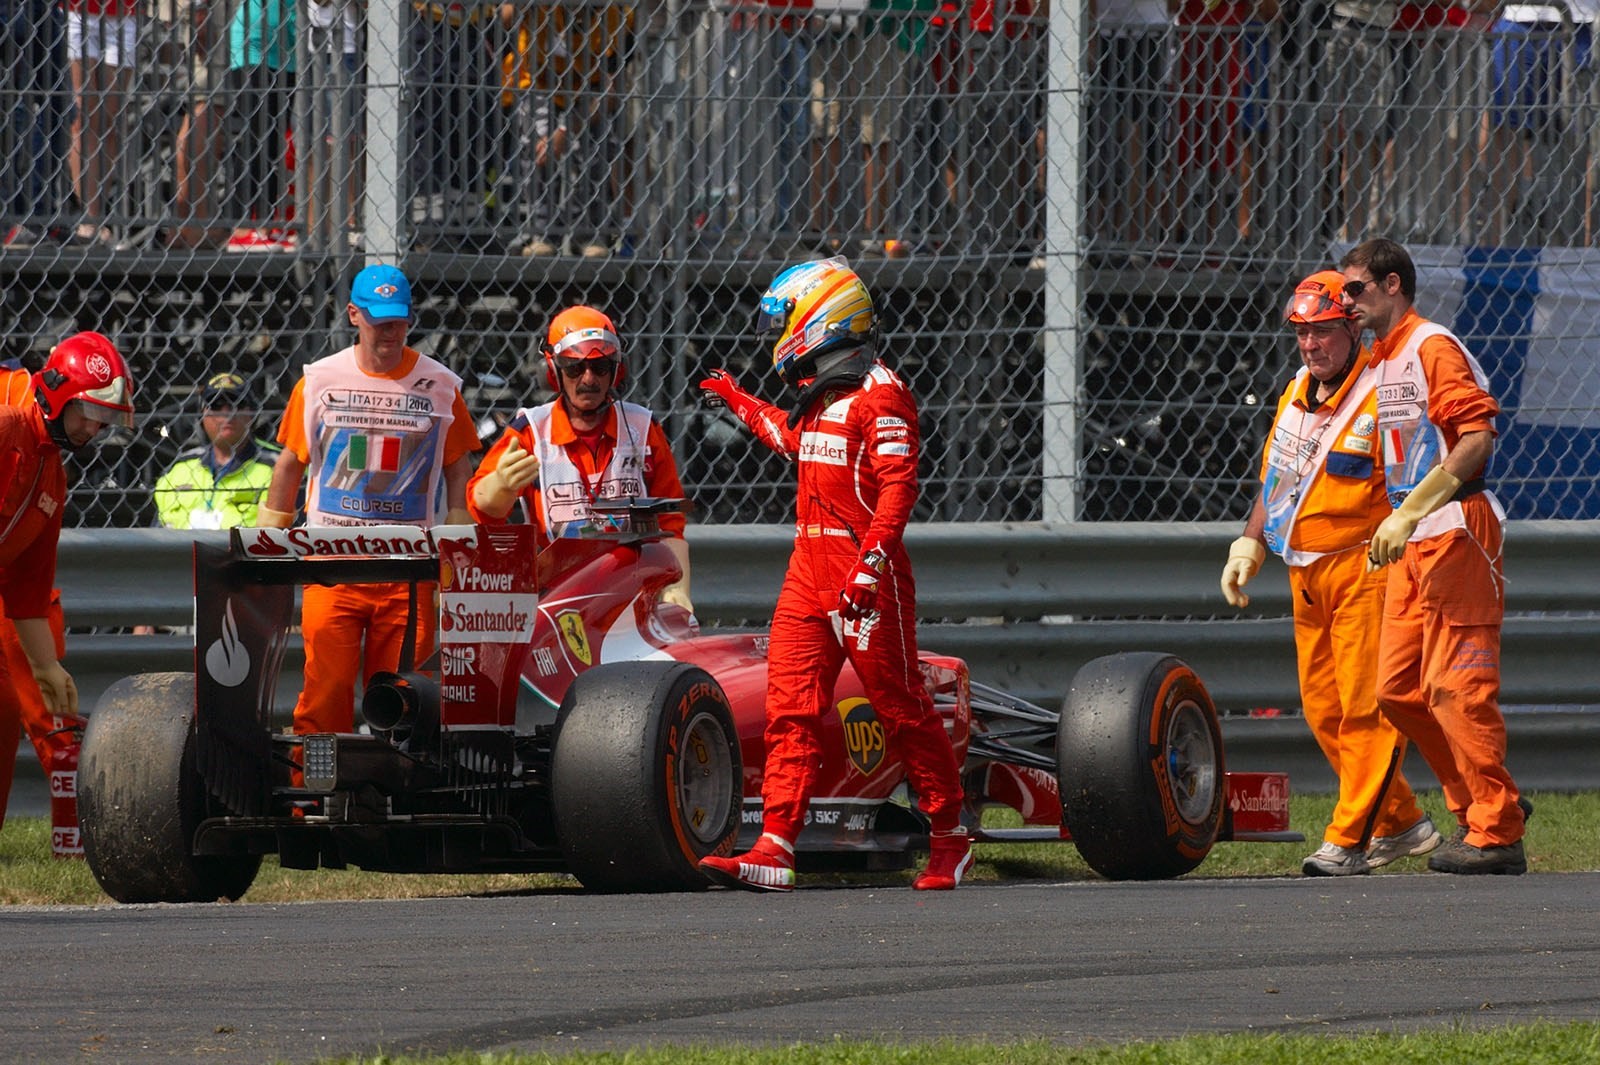 Fernando Alonso has to stop his Ferrari with a problem in the Energy Recovery Systems (ERS), Italian Grand Prix, Monza, 2014. 